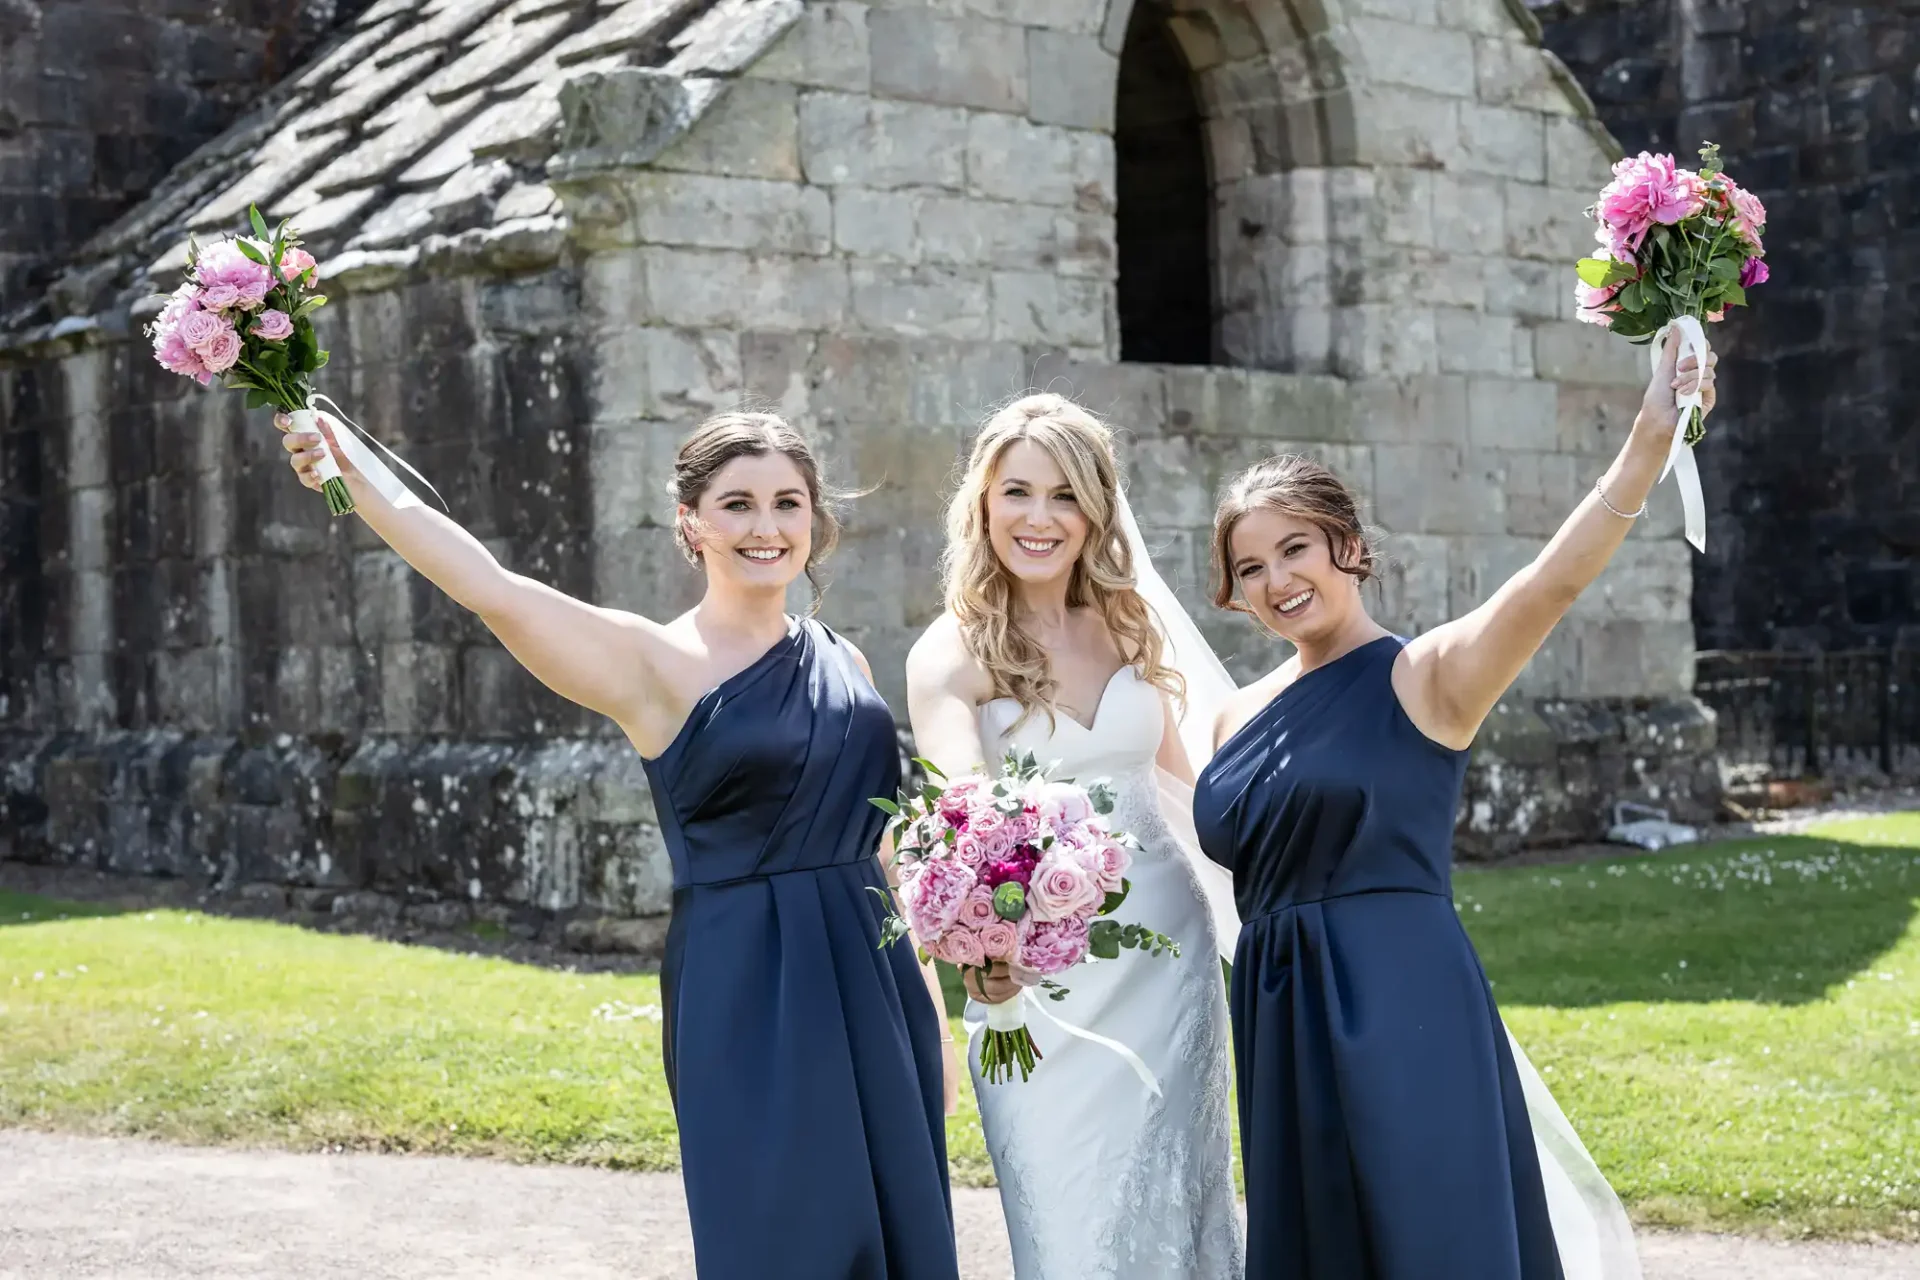 A bride in a white dress and two bridesmaids in navy blue dresses holding pink bouquets, standing before an ancient stone church on a sunny day.